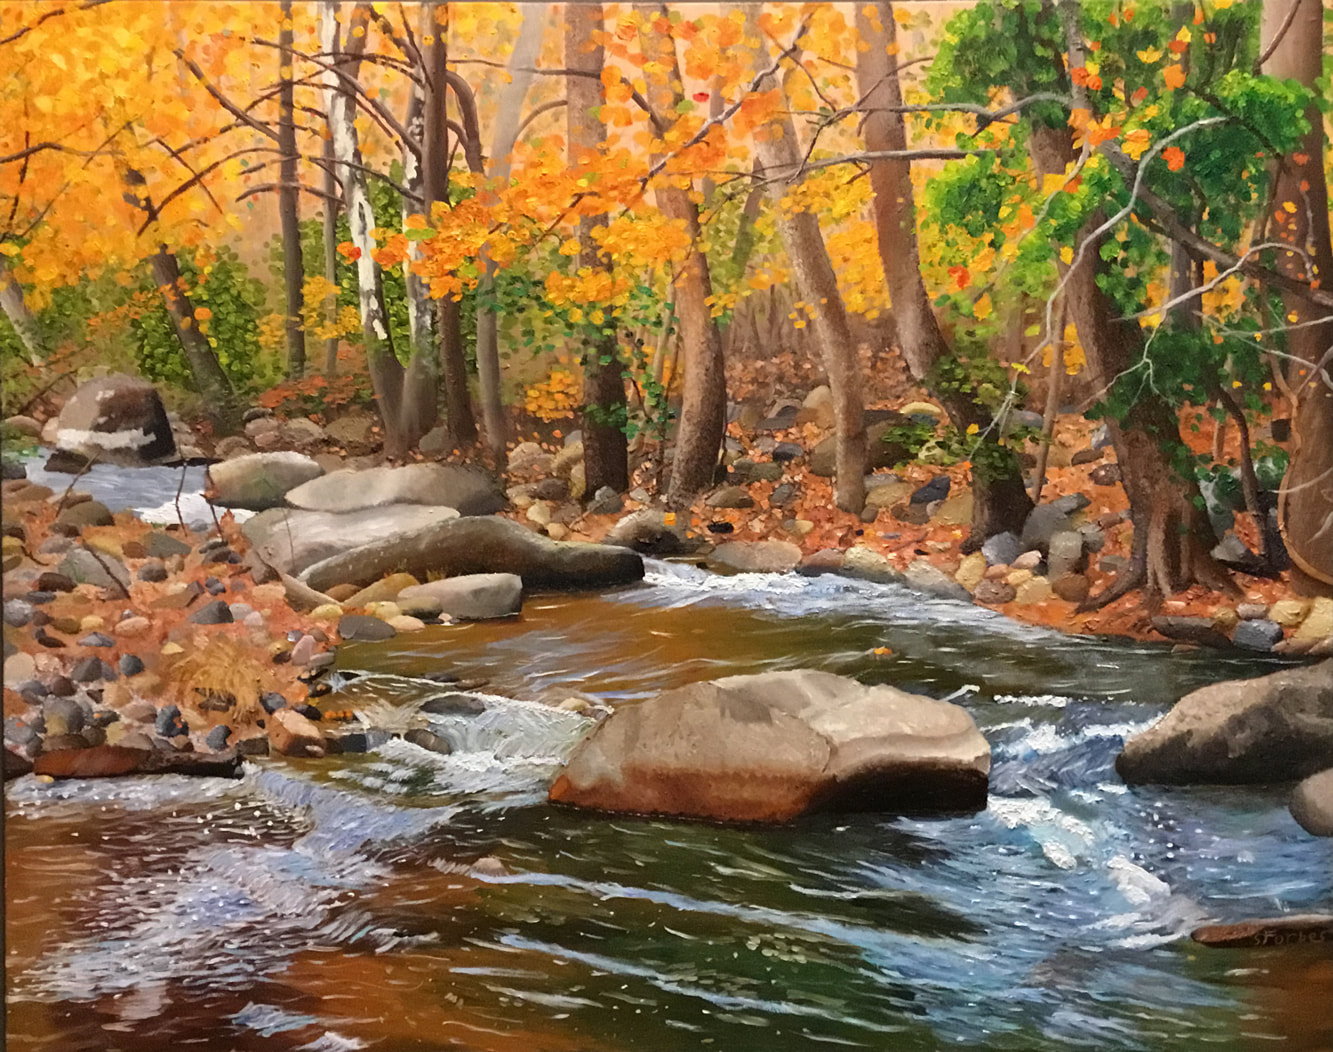 Autumn Serenity - Oil Painting on Canvas by Steven Forbes